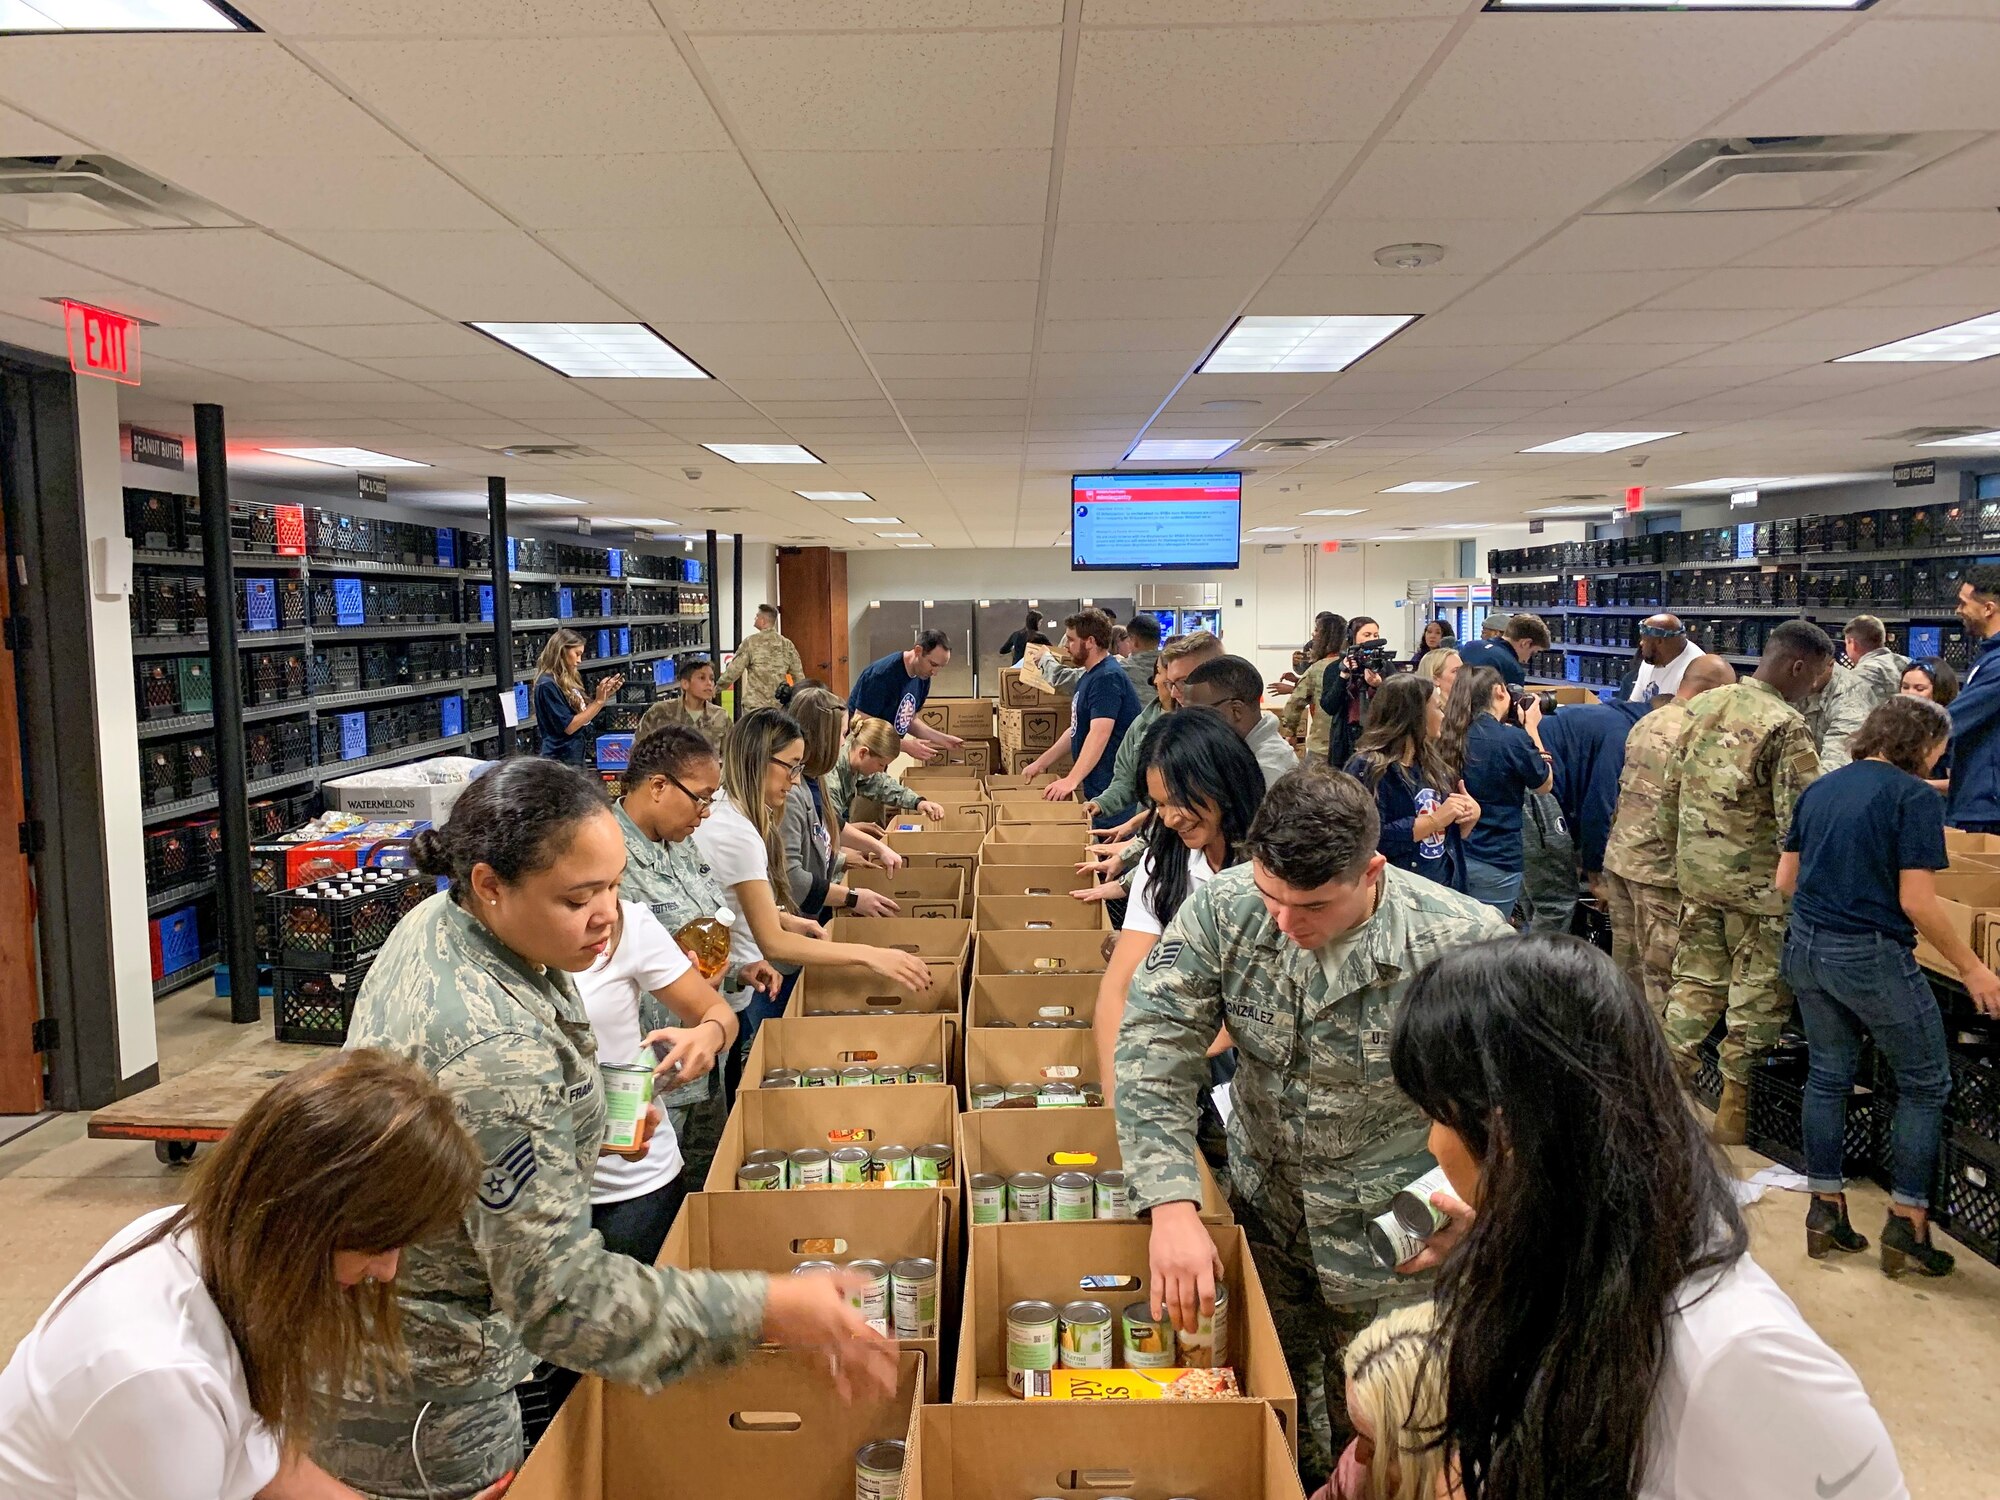 Team Fort Worth members representing the Air Force, Air National Guard, and Navy came together with the National Basketball Association’s Dallas Mavericks on November 5, 2019 to construct 500 meal packages that were slated to be distributed to local veterans in need during the holiday season. Hoops for Troops: Commitment to Service is a DoD initiative where the military and NBA teams from across the country partner together to serve their surrounding communities. (U.S. Air Force photo by Capt. Jessica Gross)